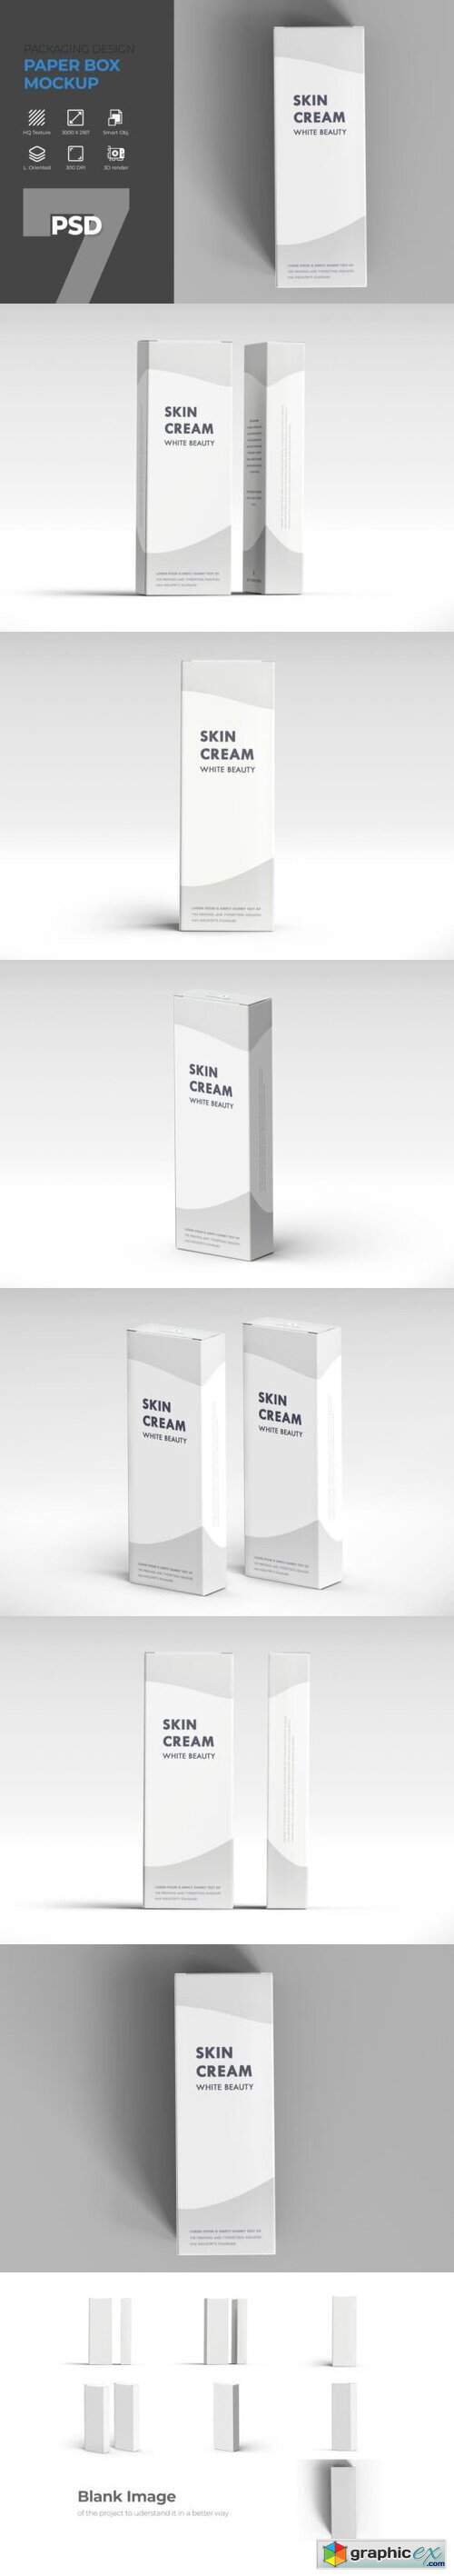 Paper Box Mockup For Beauty Product